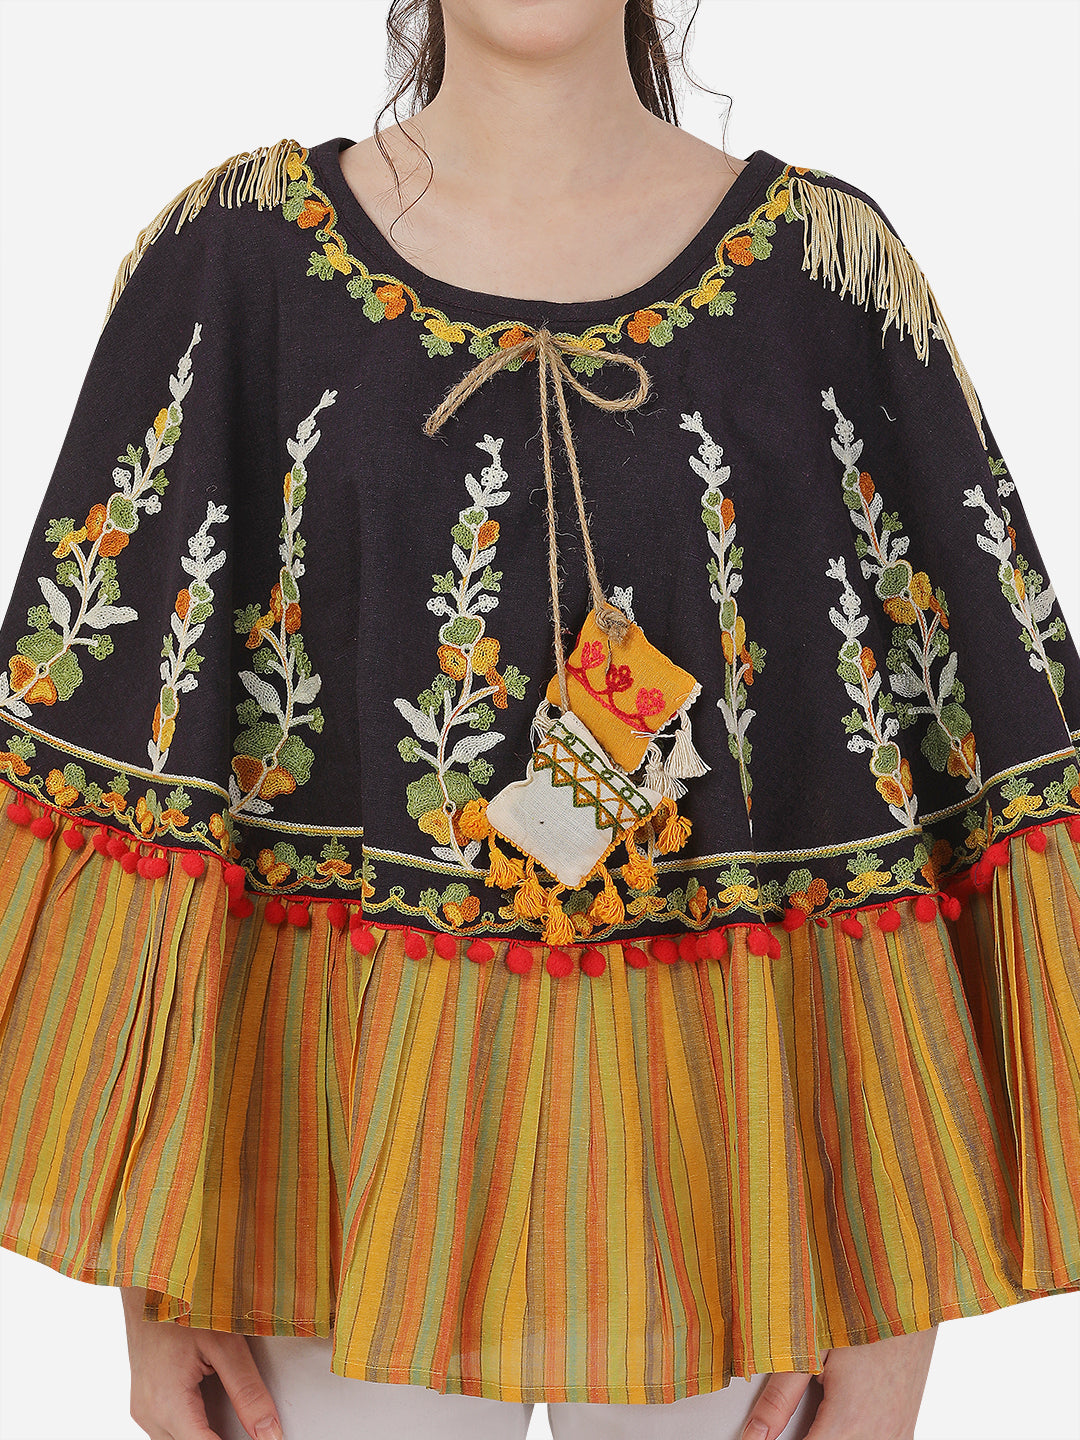 Dark Purple Floral Embroidered Fancy Circular Poncho/Cape